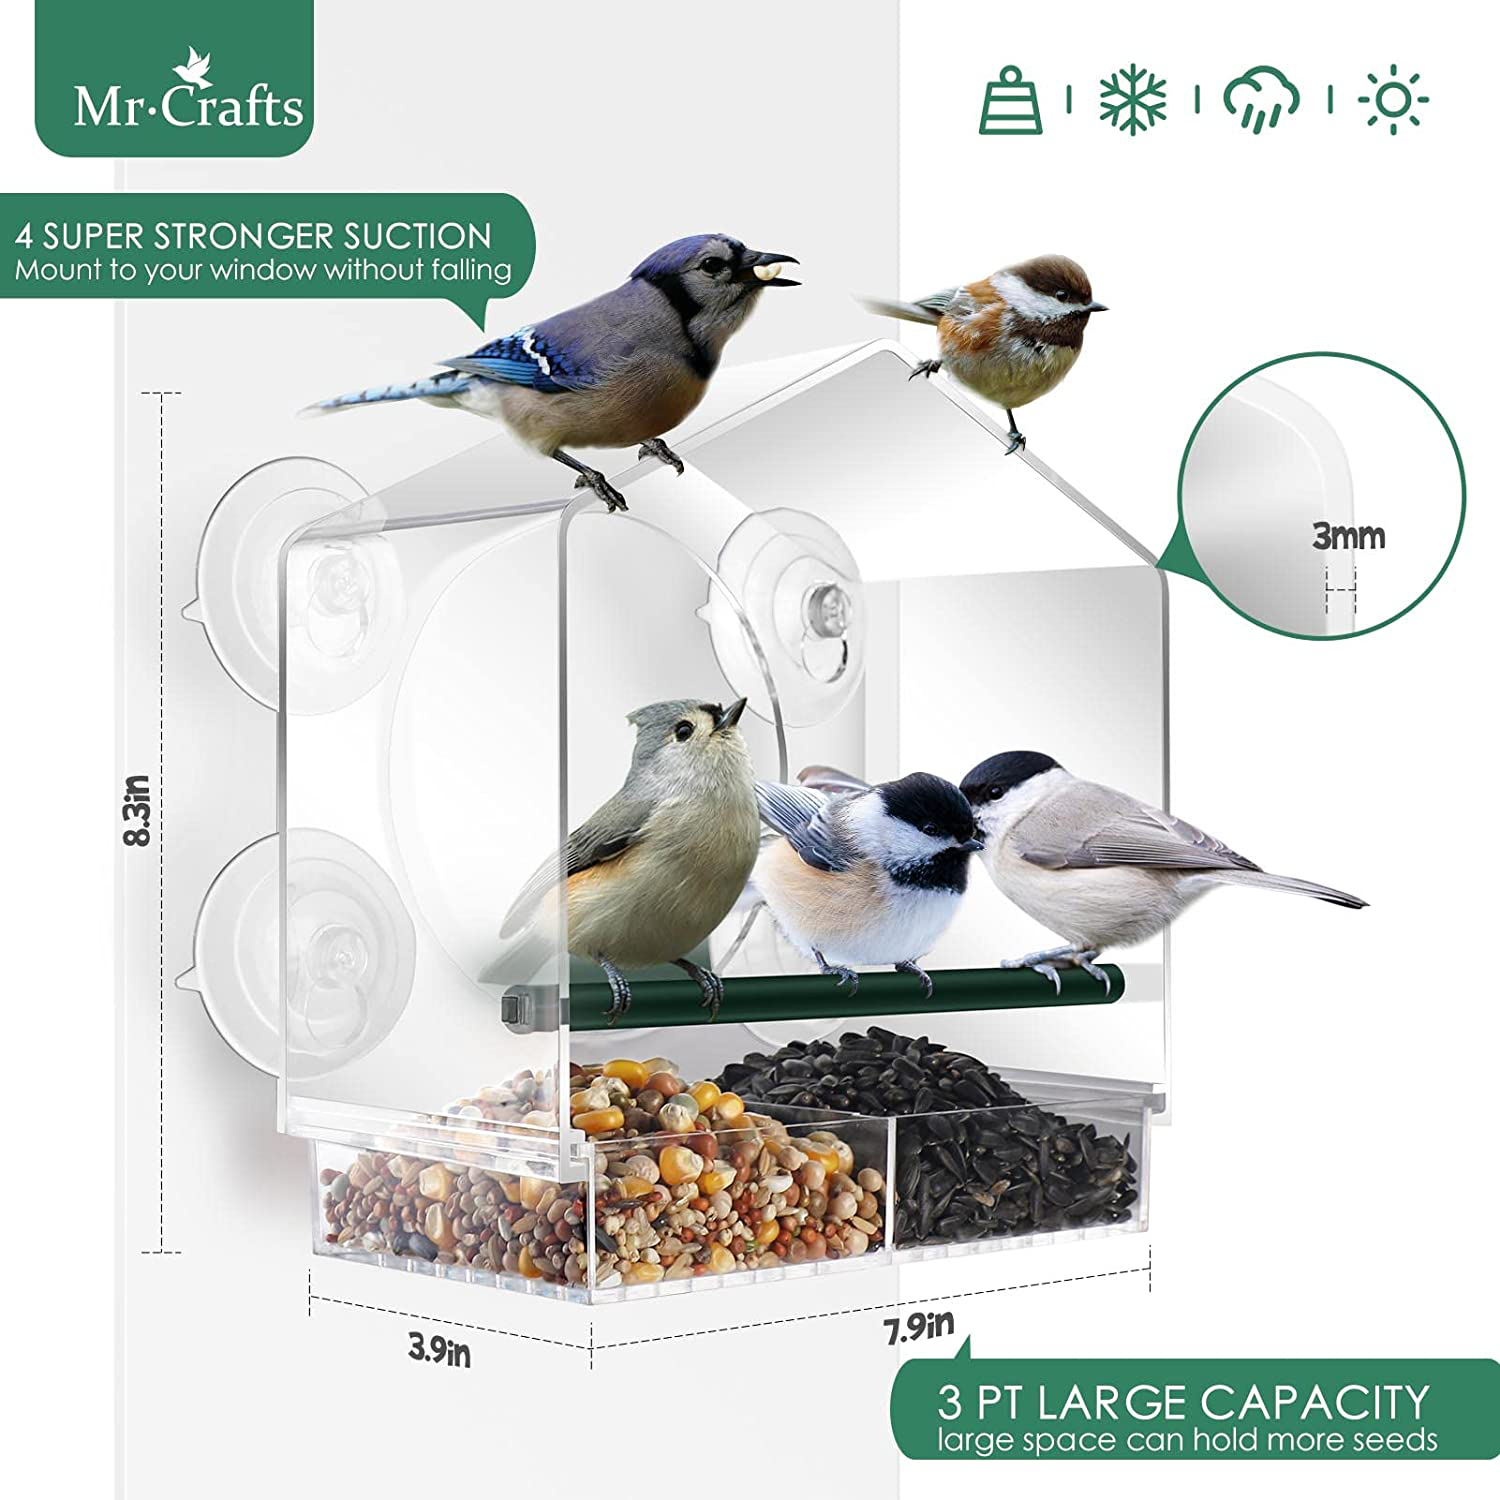 Mrcrafts Window Bird Feeder for outside with Strong Suction Cups, Fits for Cardinals, Finches, Chickadees Etc.